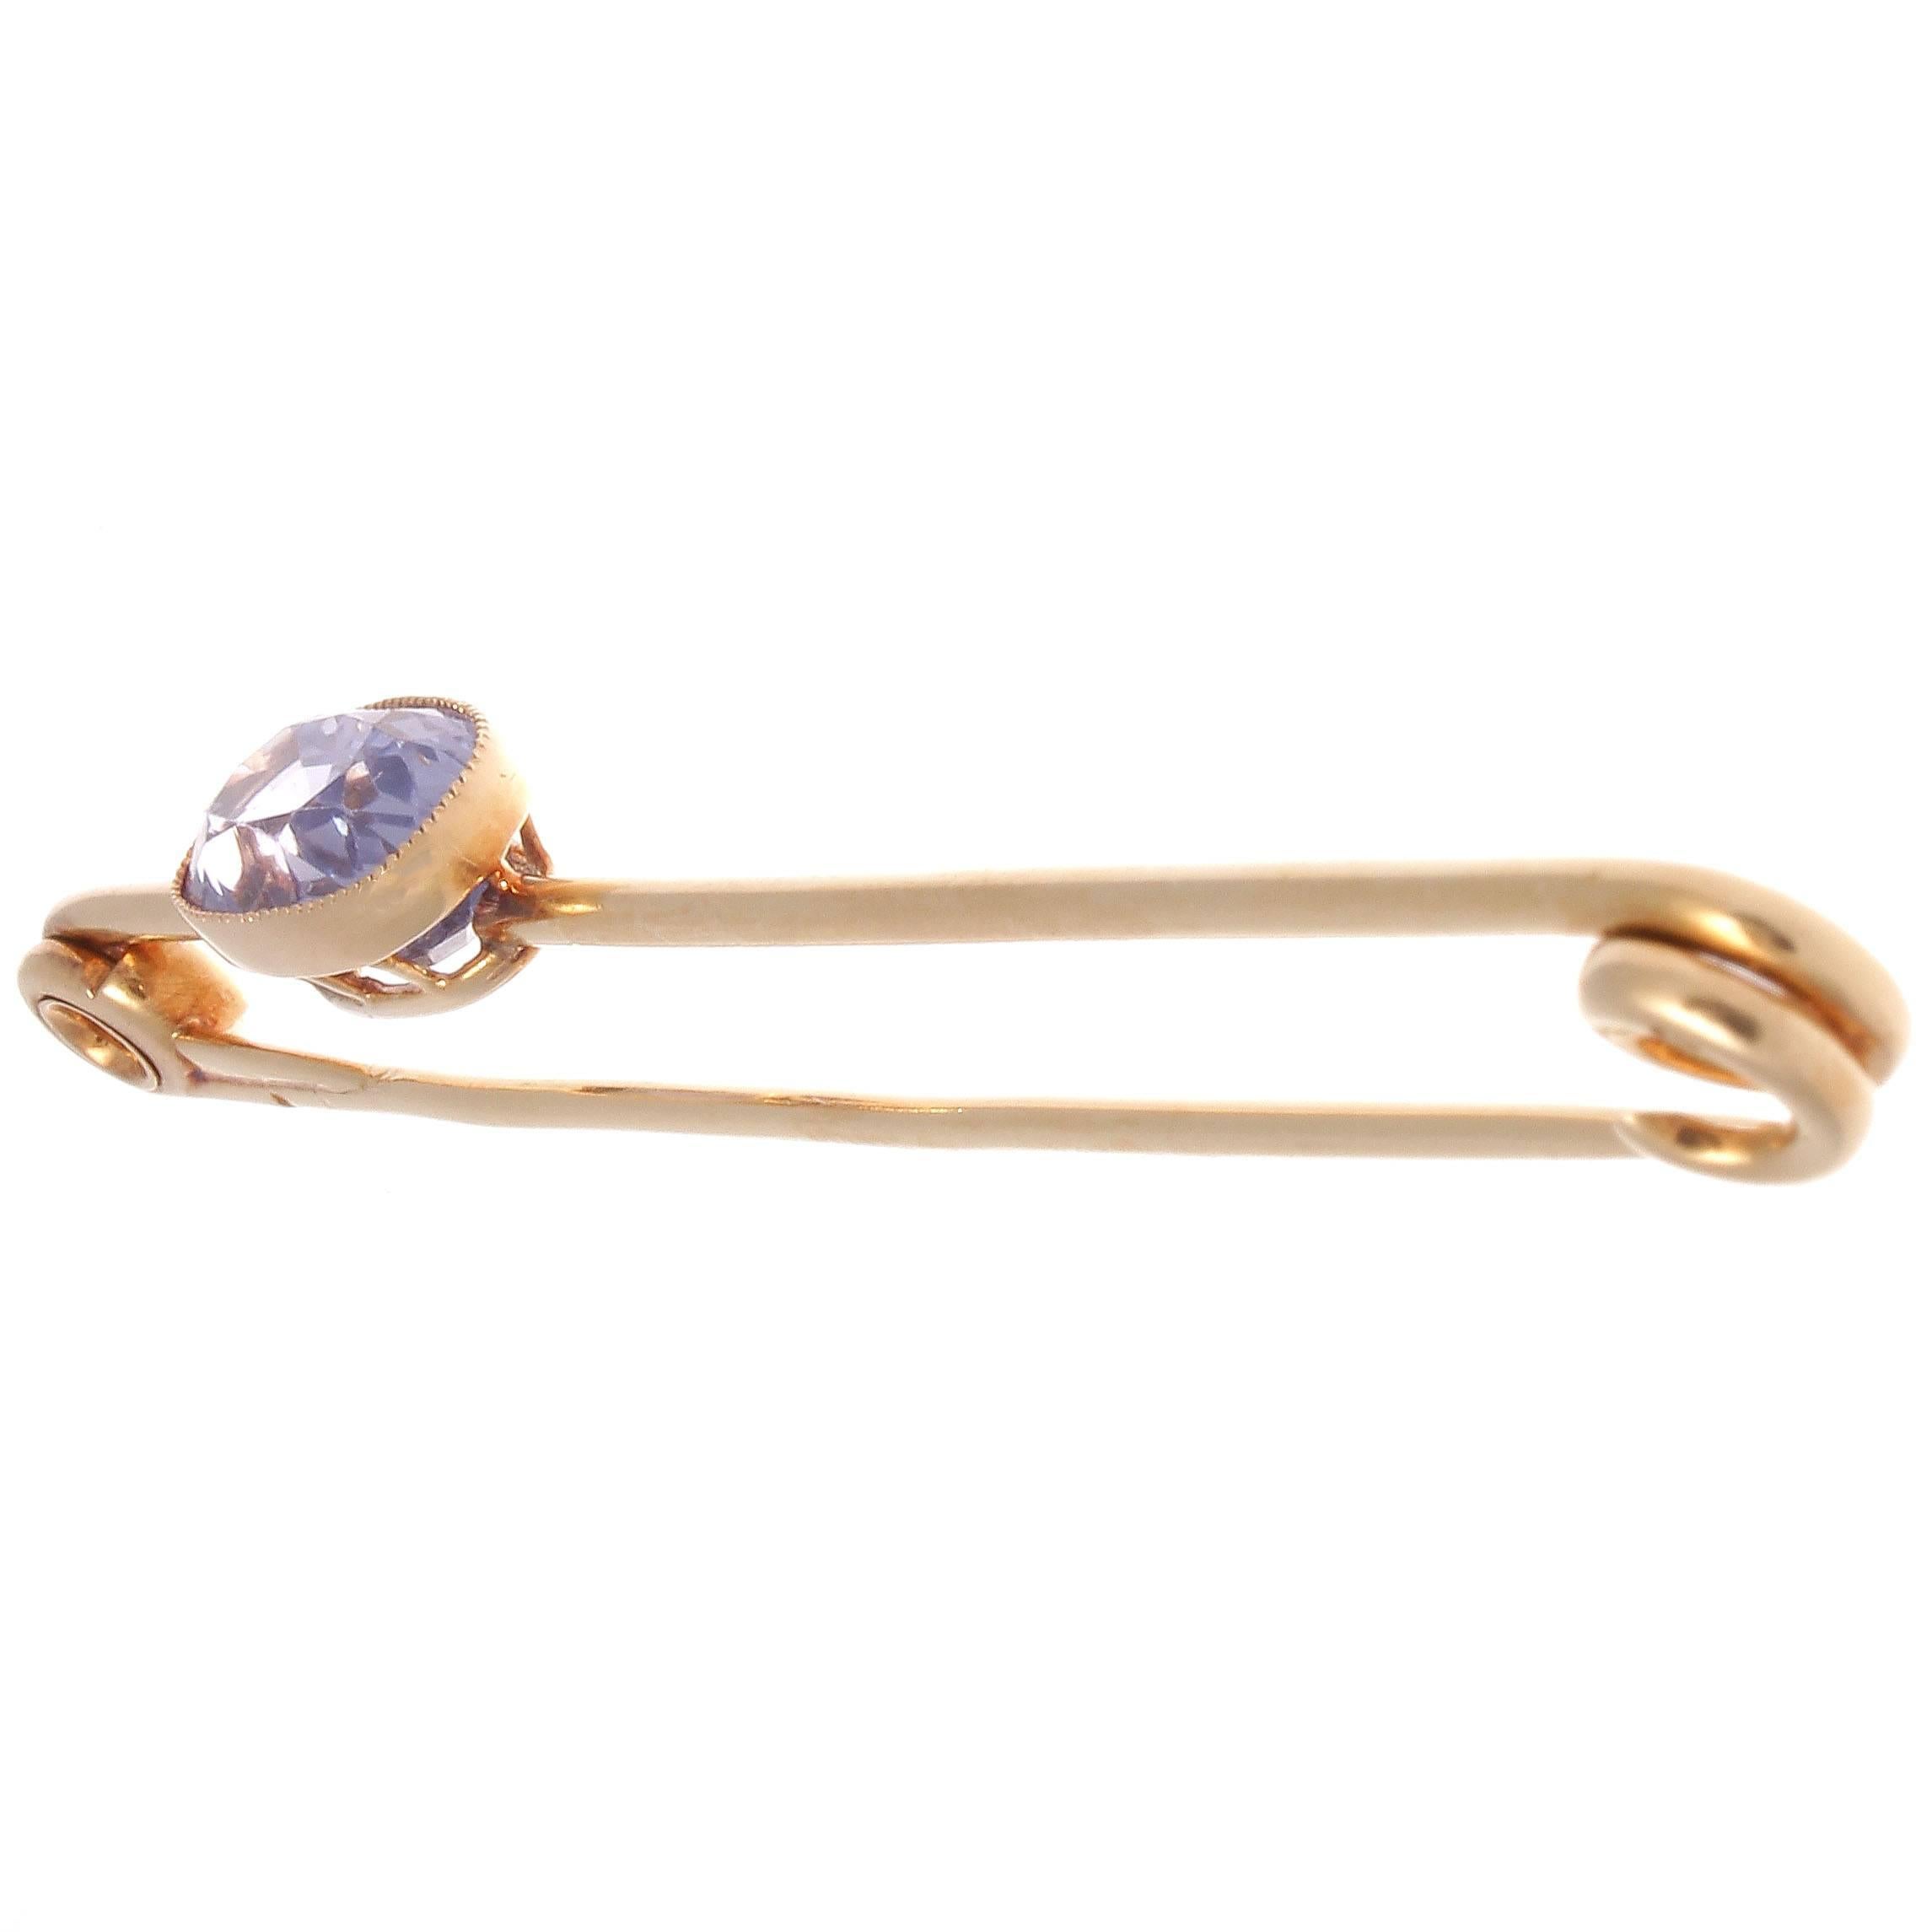 The French sophistication and creativity is unmatched in design. This creative safety-pin exemplifies the bold larger than life designs of the Retro period. 

Featuring an approximately 7.80 carat rich purplish/violet oval cut sapphire that is